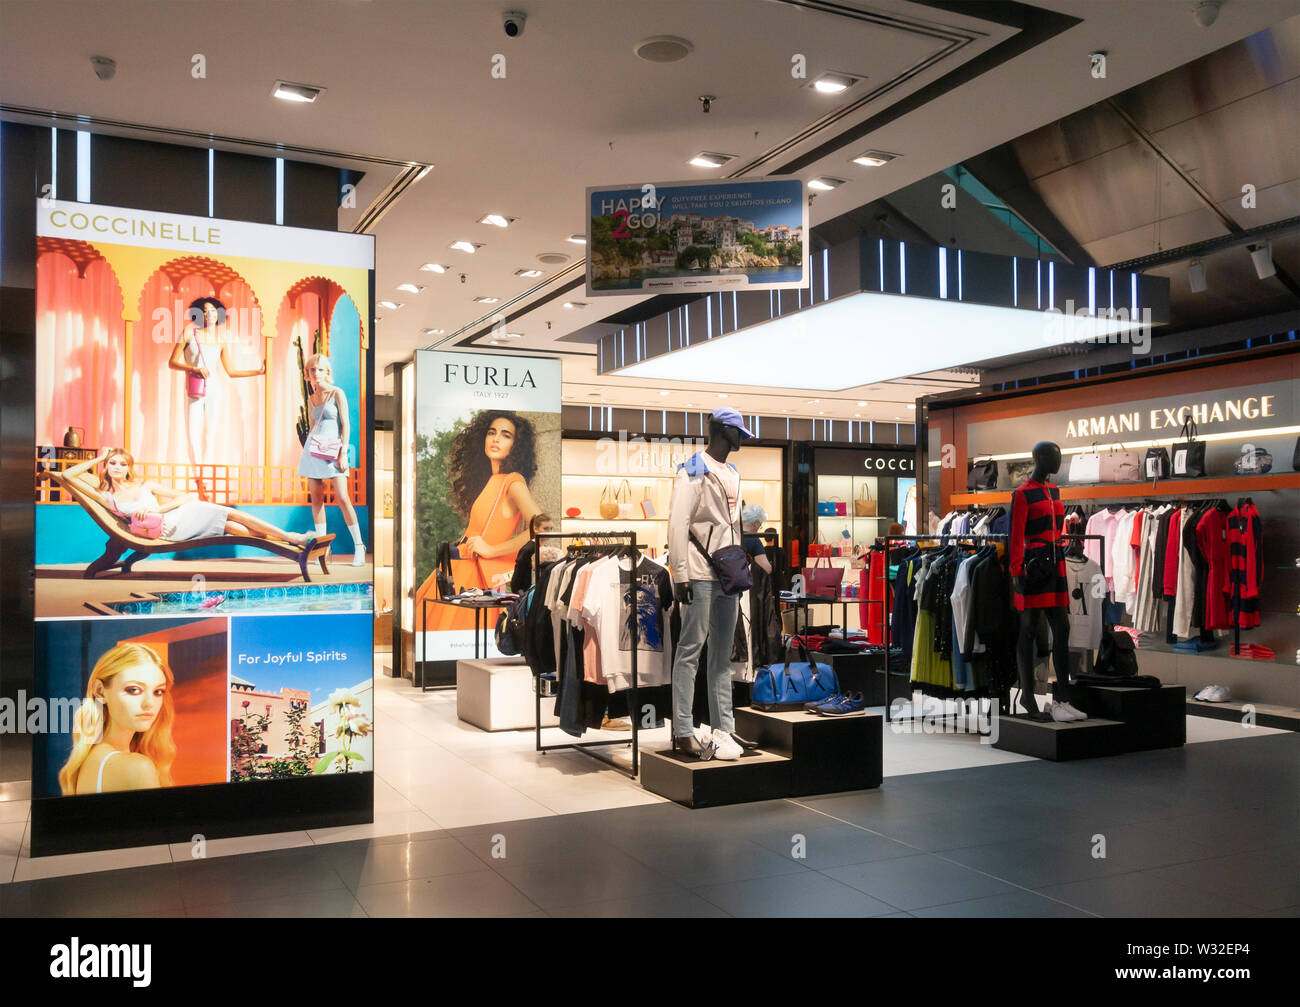 Luxury fashion shop selling clothes and accessories by Furla, Armani  Exchange and Coccinelle in Bucharest Airport, Romania Stock Photo - Alamy